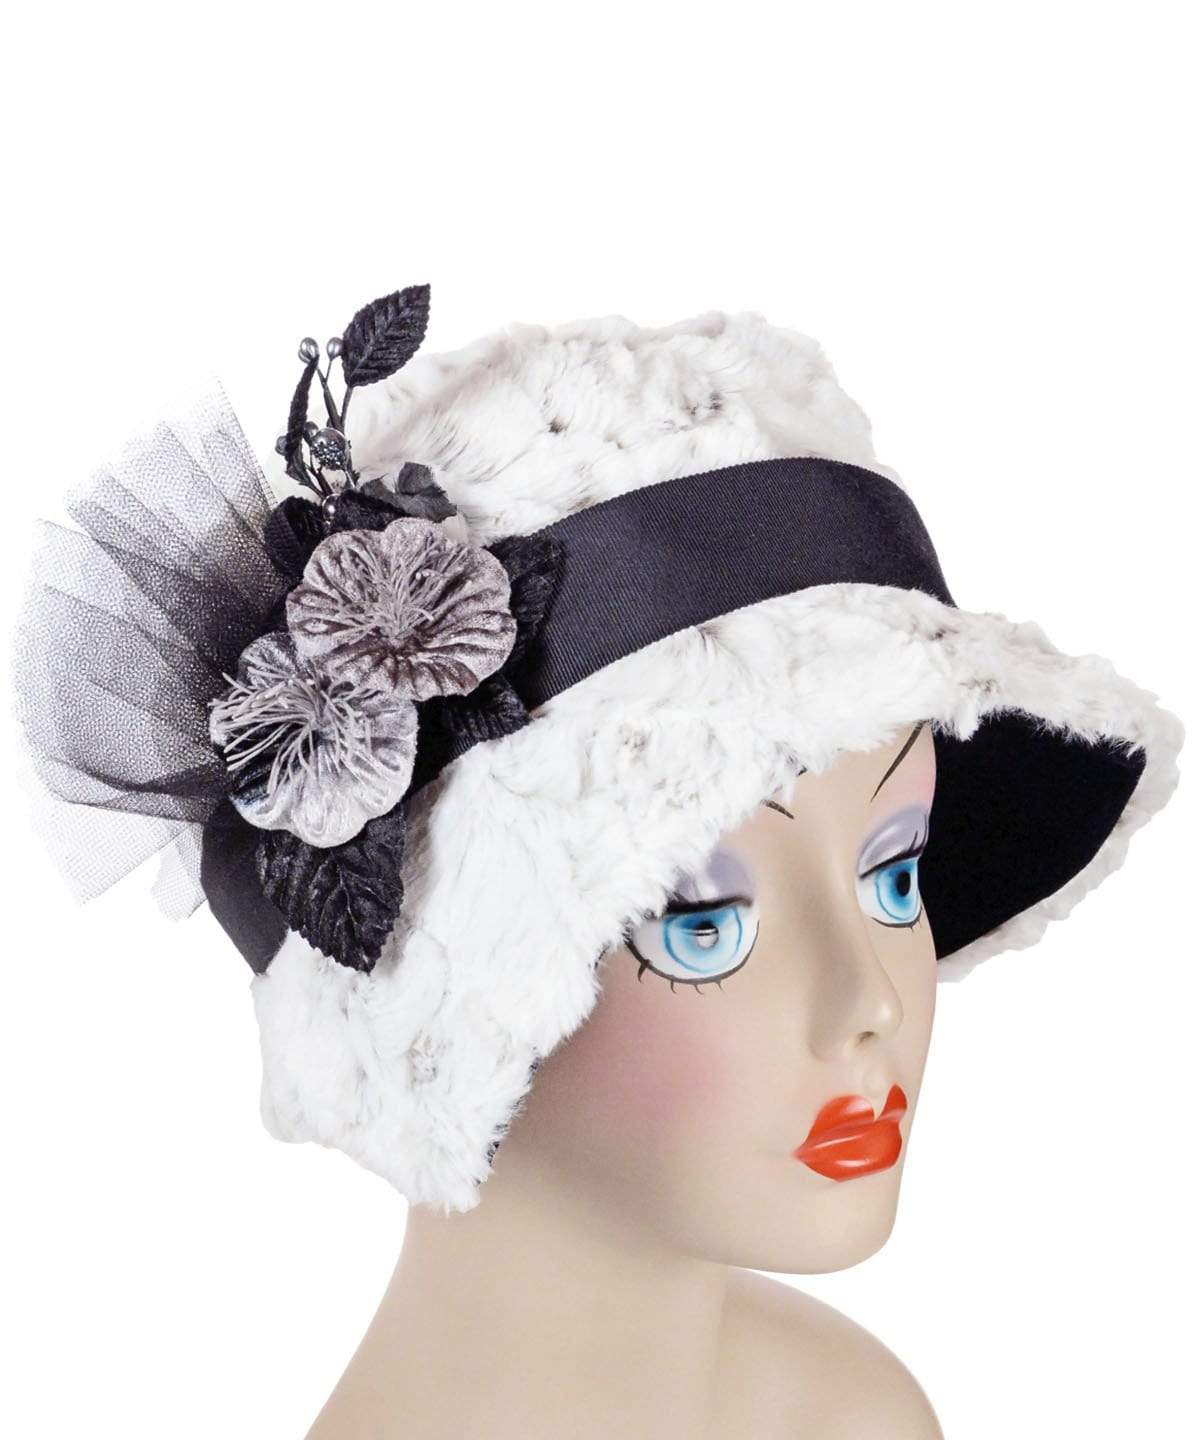 Abigail Hat in Winter’s Frost White Luxury Faux Fur with Black Faux Suede under rim. Trimmed with Black Grosgrain Band and Velvet Silver Flowers| Handmade in Seattle WA| Pandemonium Millinery 